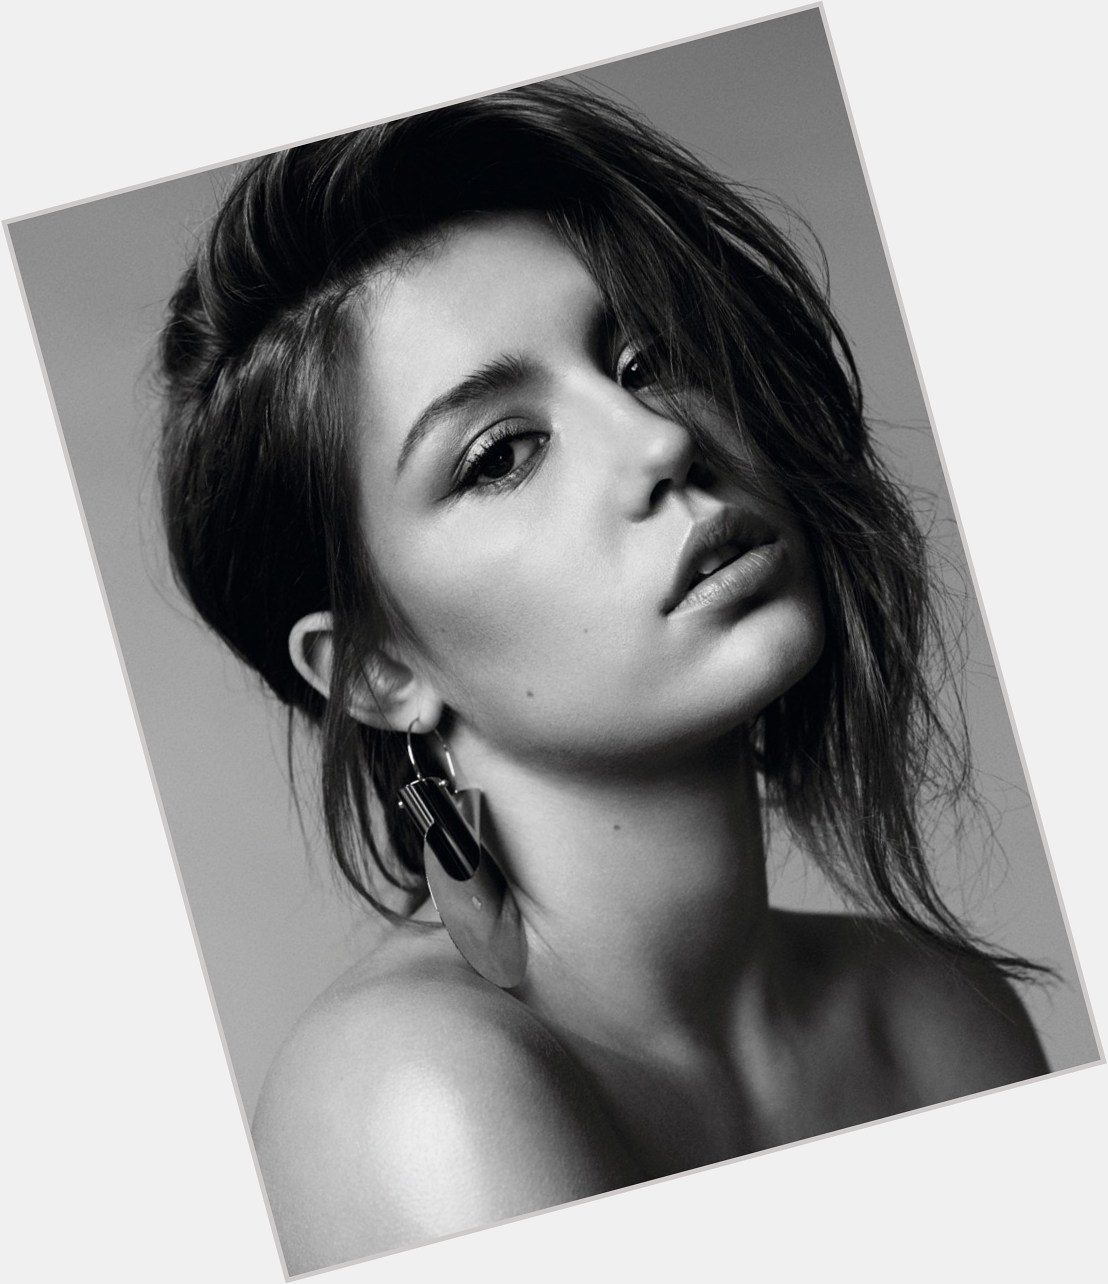 Happy birthday to the French goddess Adele Exarchopoulos! 